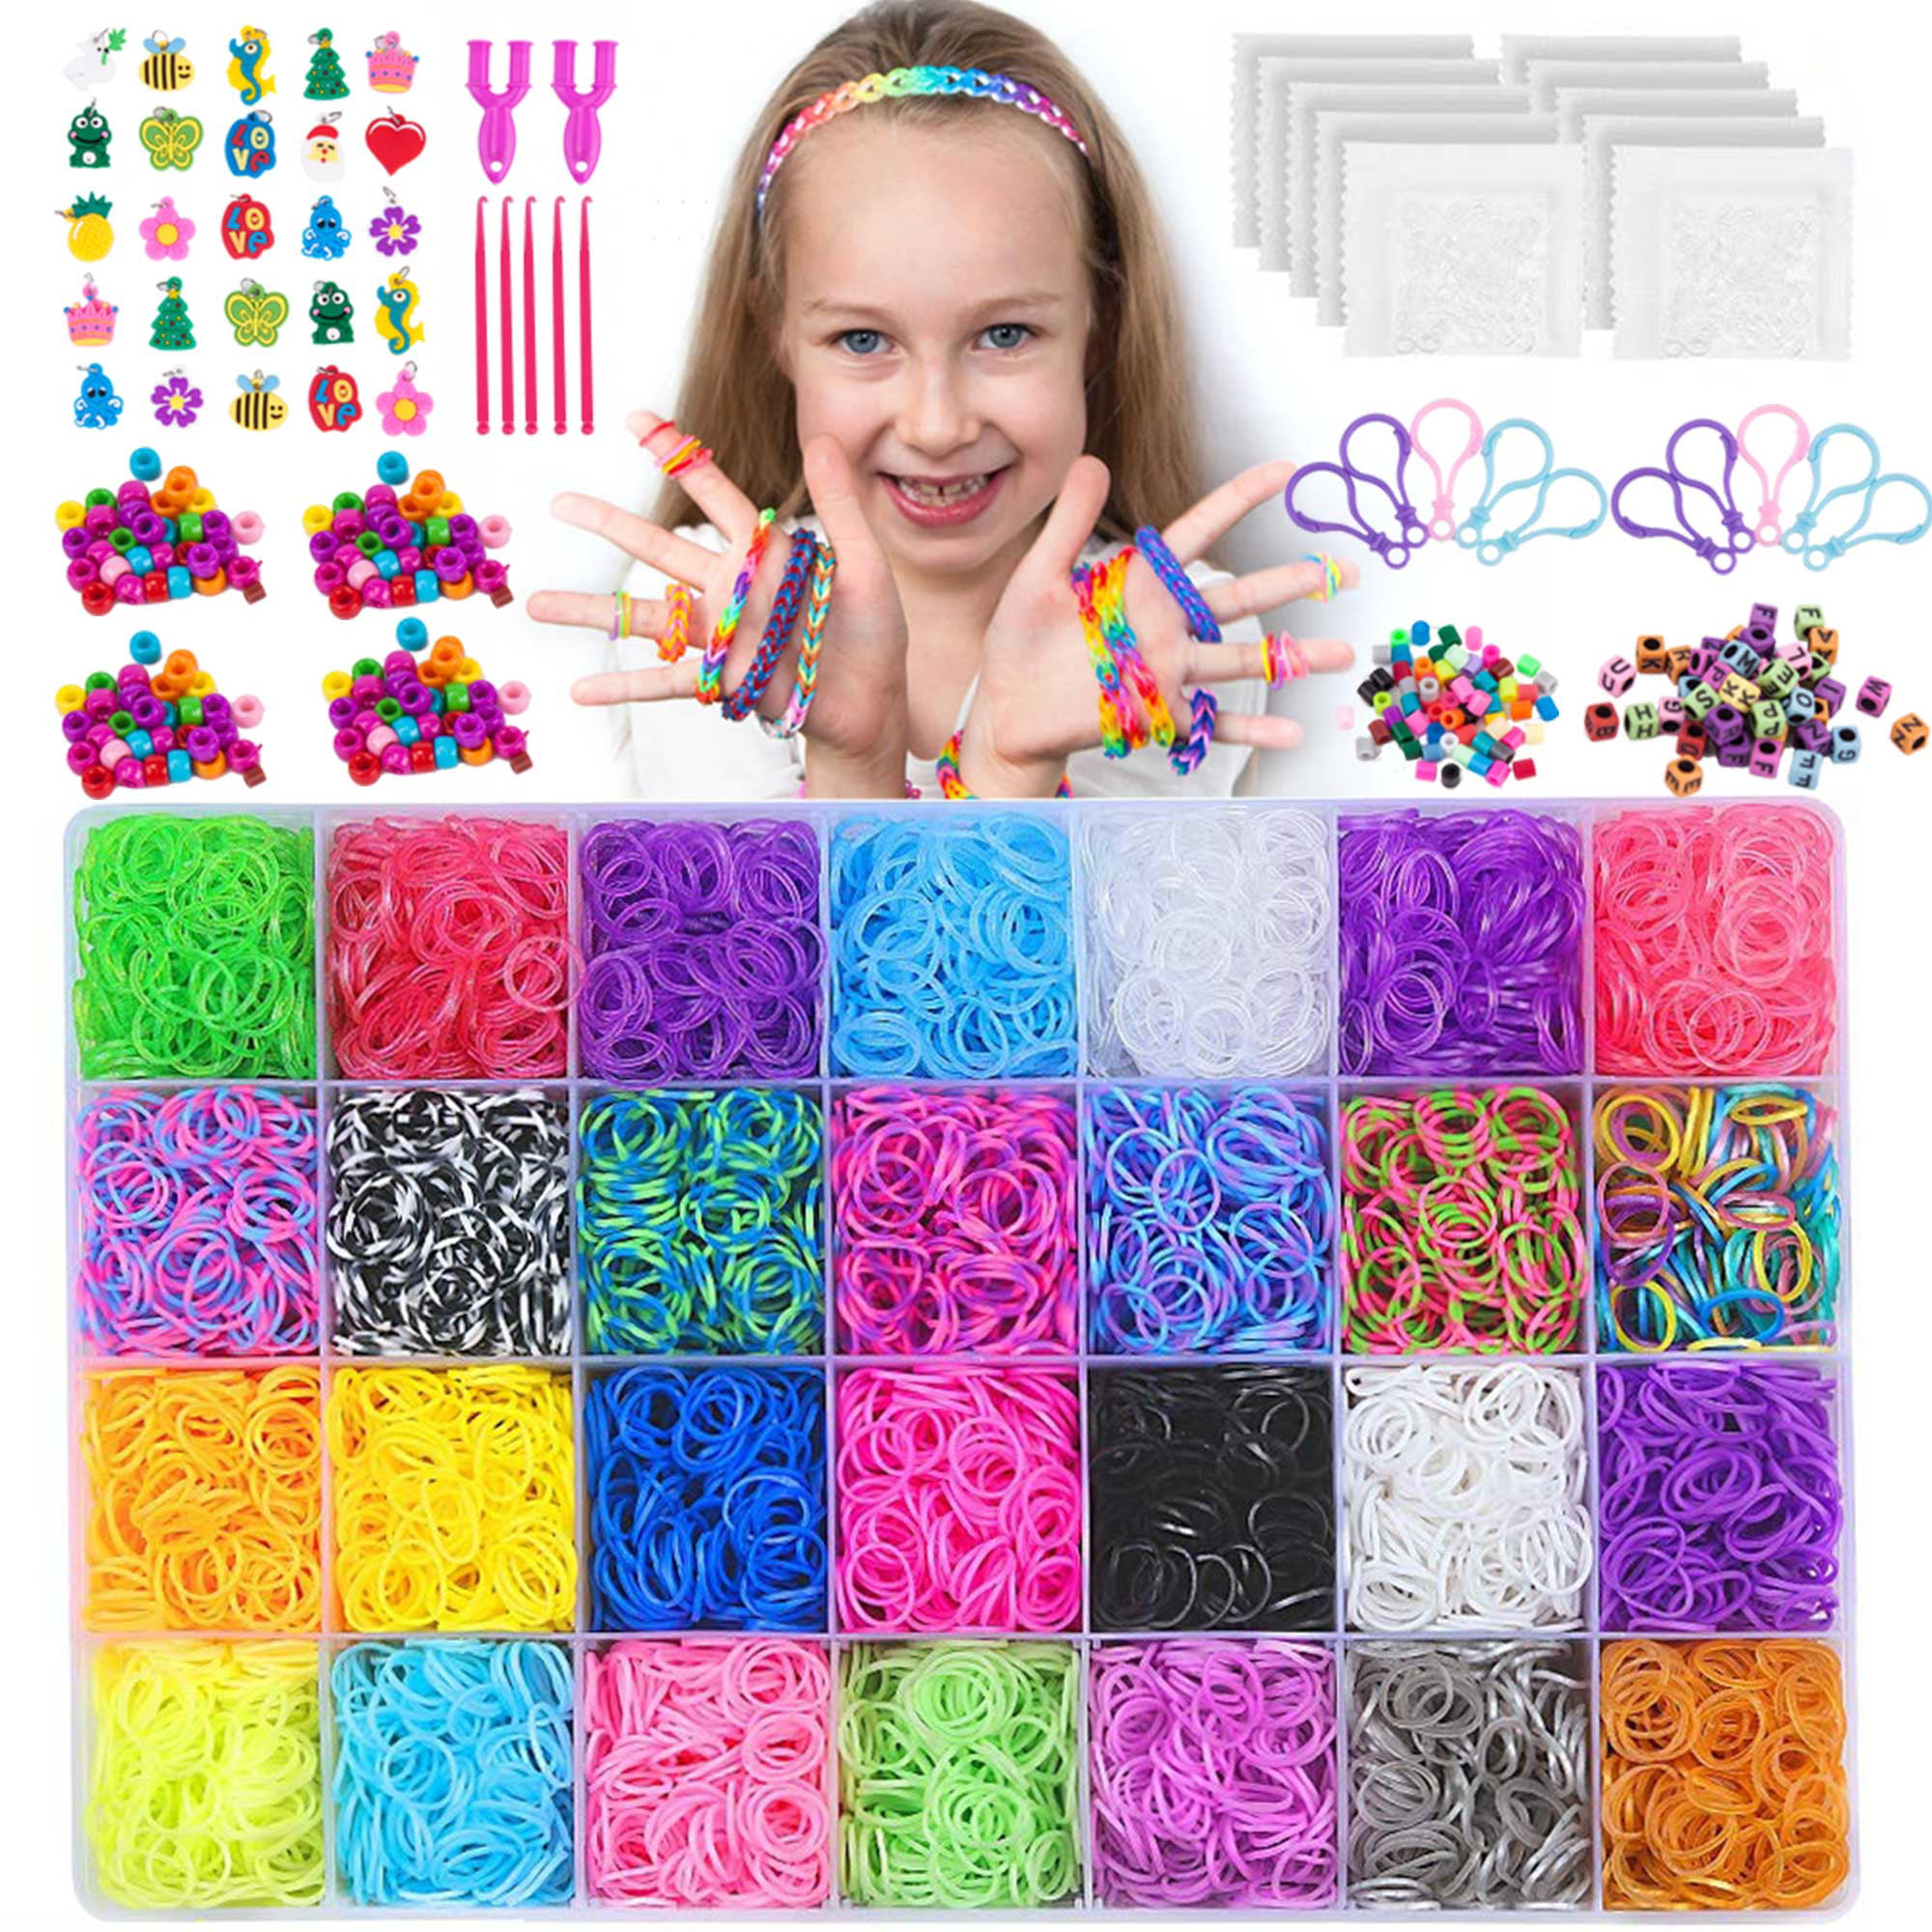 Rubber Bands Loom Band Bracelet Refill Kids Rainbow Craft Clip Hair Accessories 